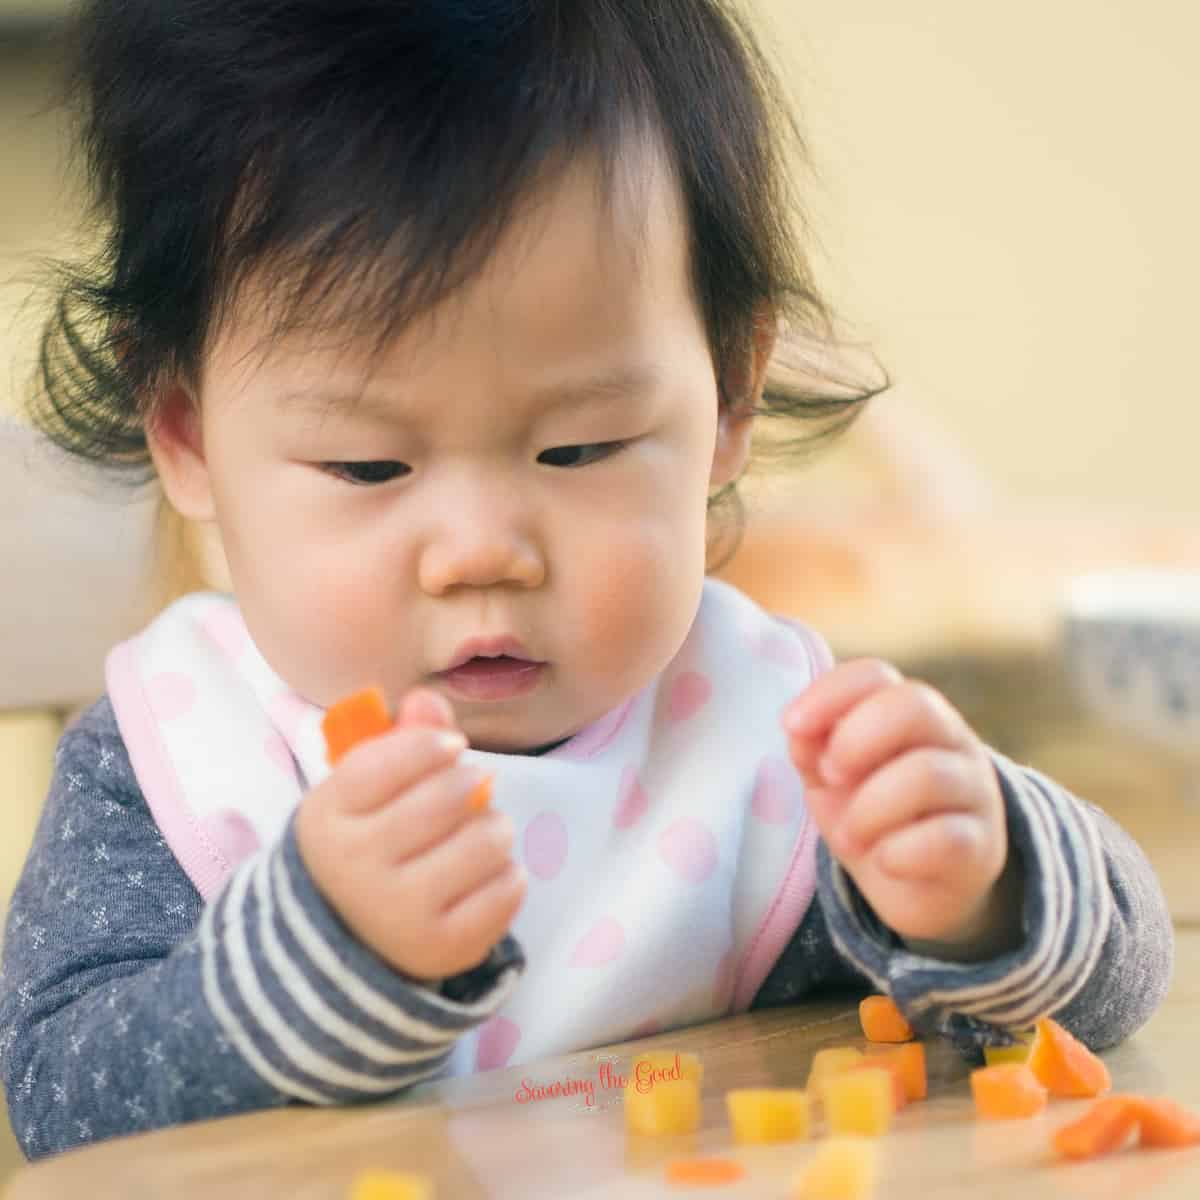 healthy baby snacks featured image of a baby holding tinny carrot pieces.